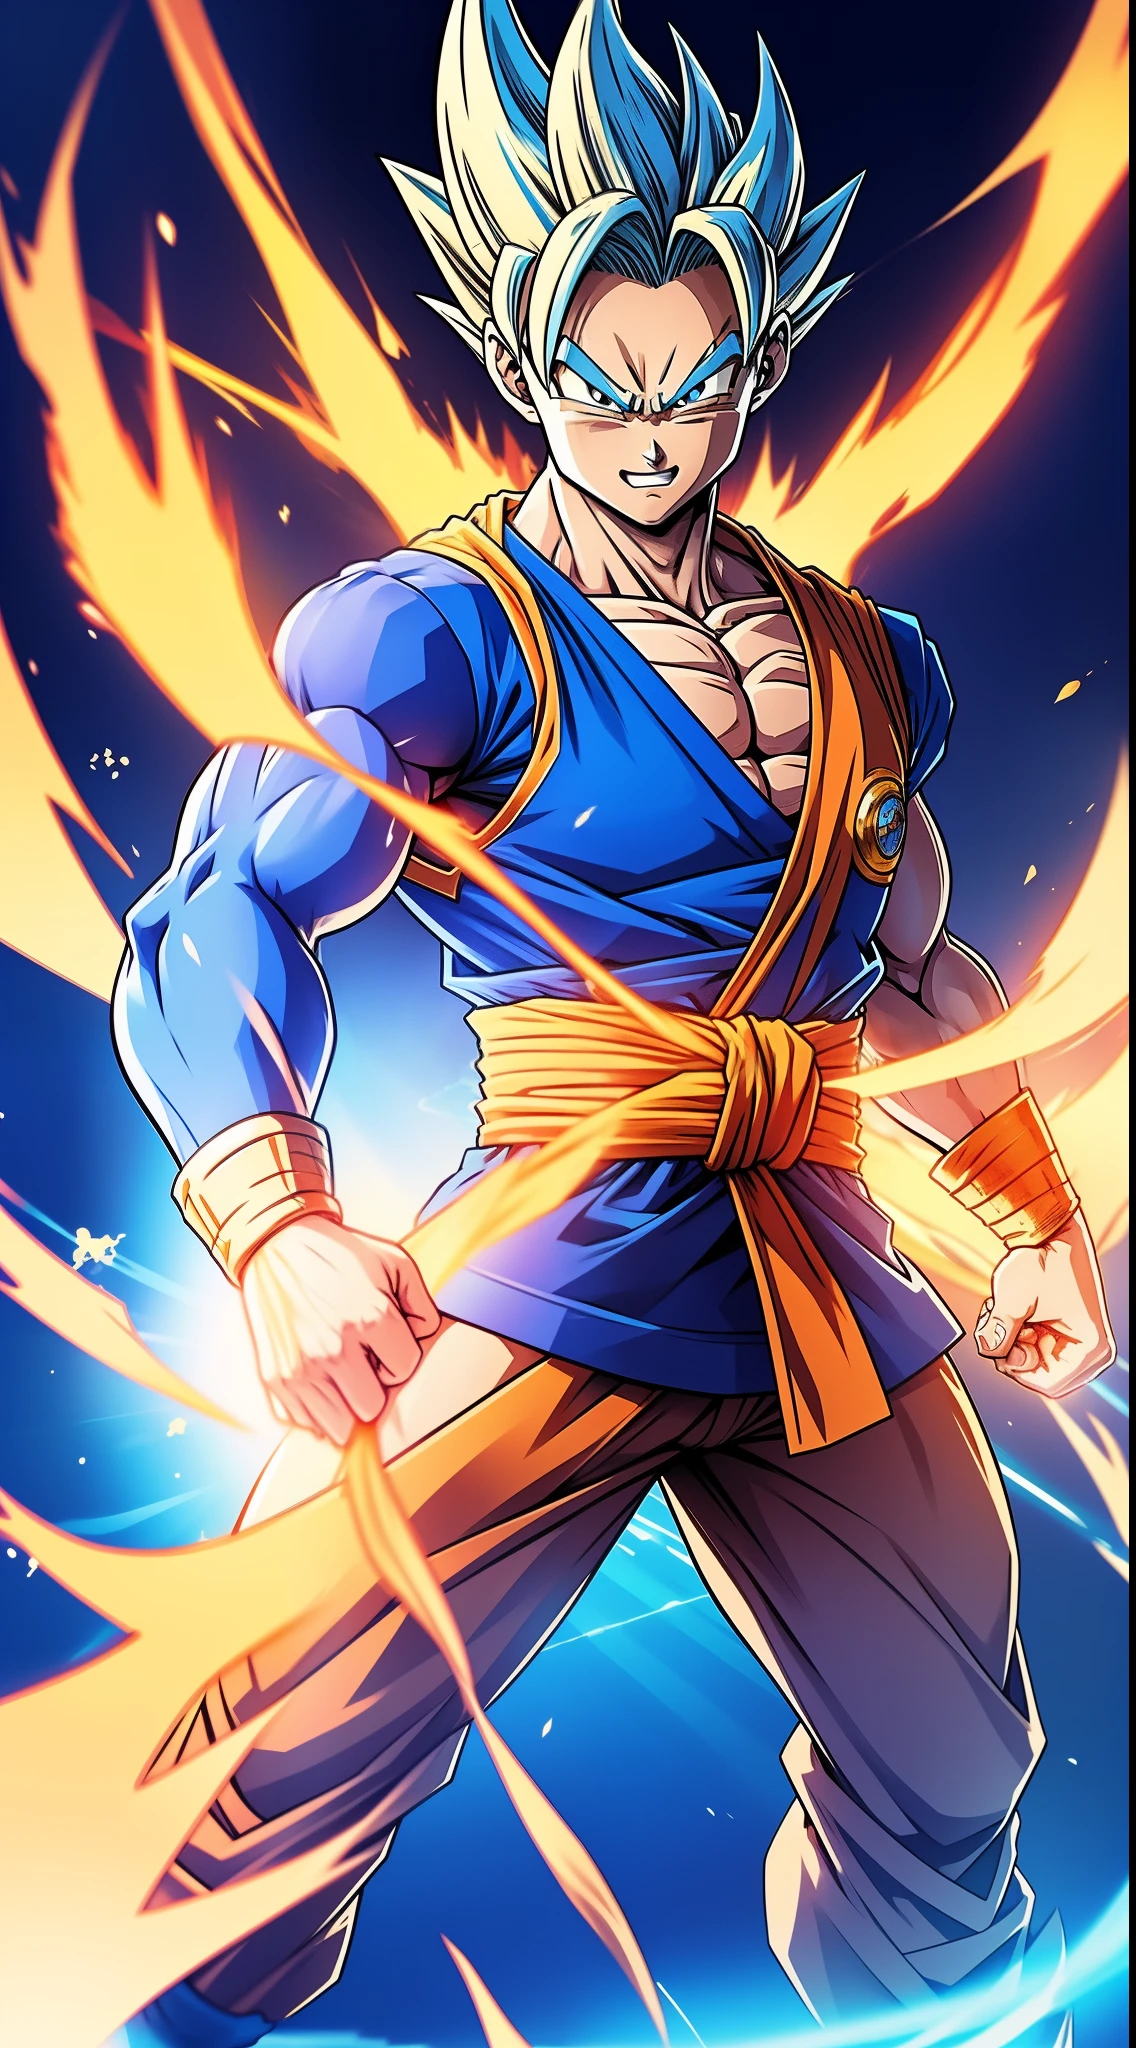 dragon ball style,(and draw the full body),Forward oblique upward view,Eyes are light blue, Goku Hair,Smiling, Orange Kempo Suit, Turtle logo on the left chest of the kempo suit,(full bodyesbian),He is in a Kamehameha stance,Blue plasma is scattered